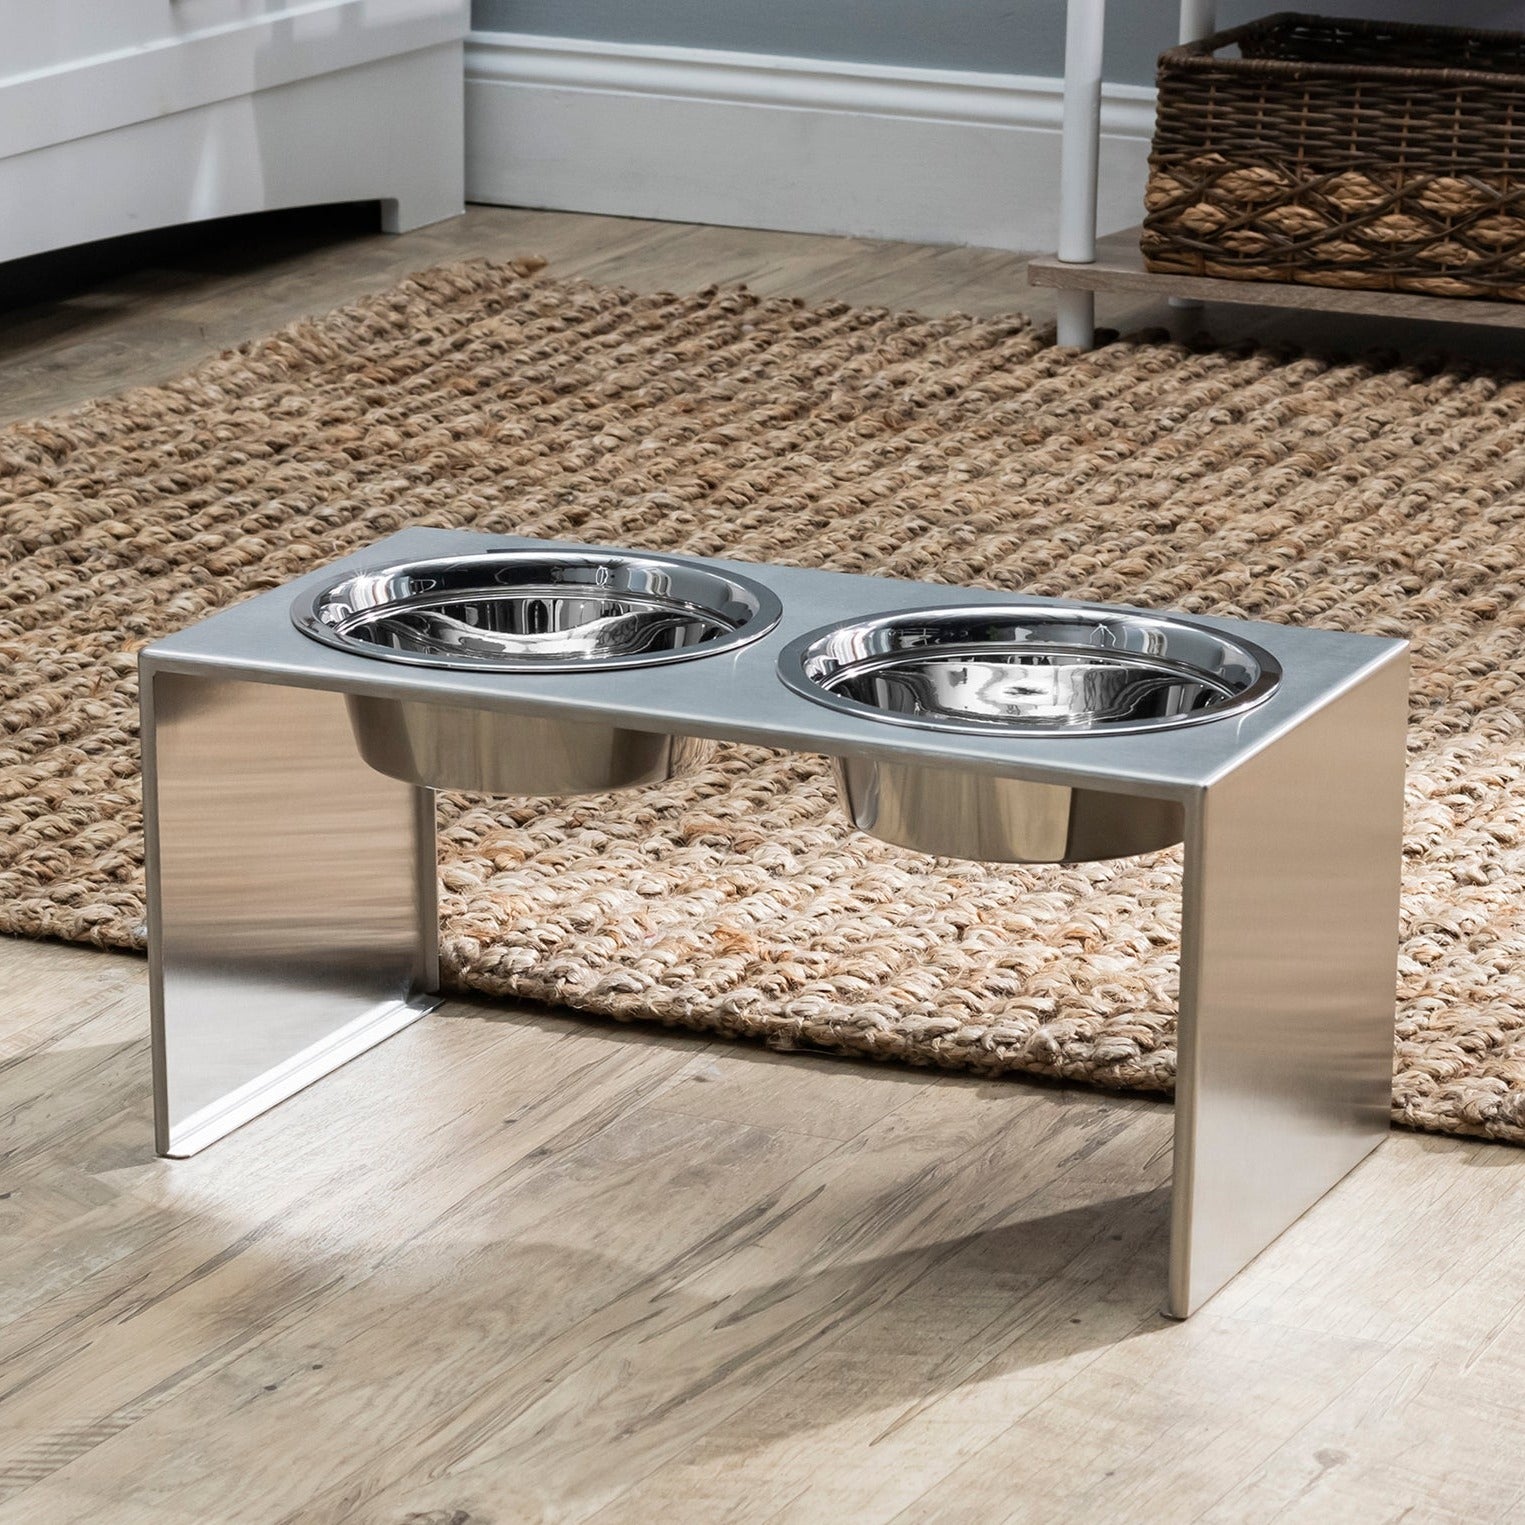 Slate. Modern Stainless Steel Elevated 2 Dog Bowl Stand. S - L Dog